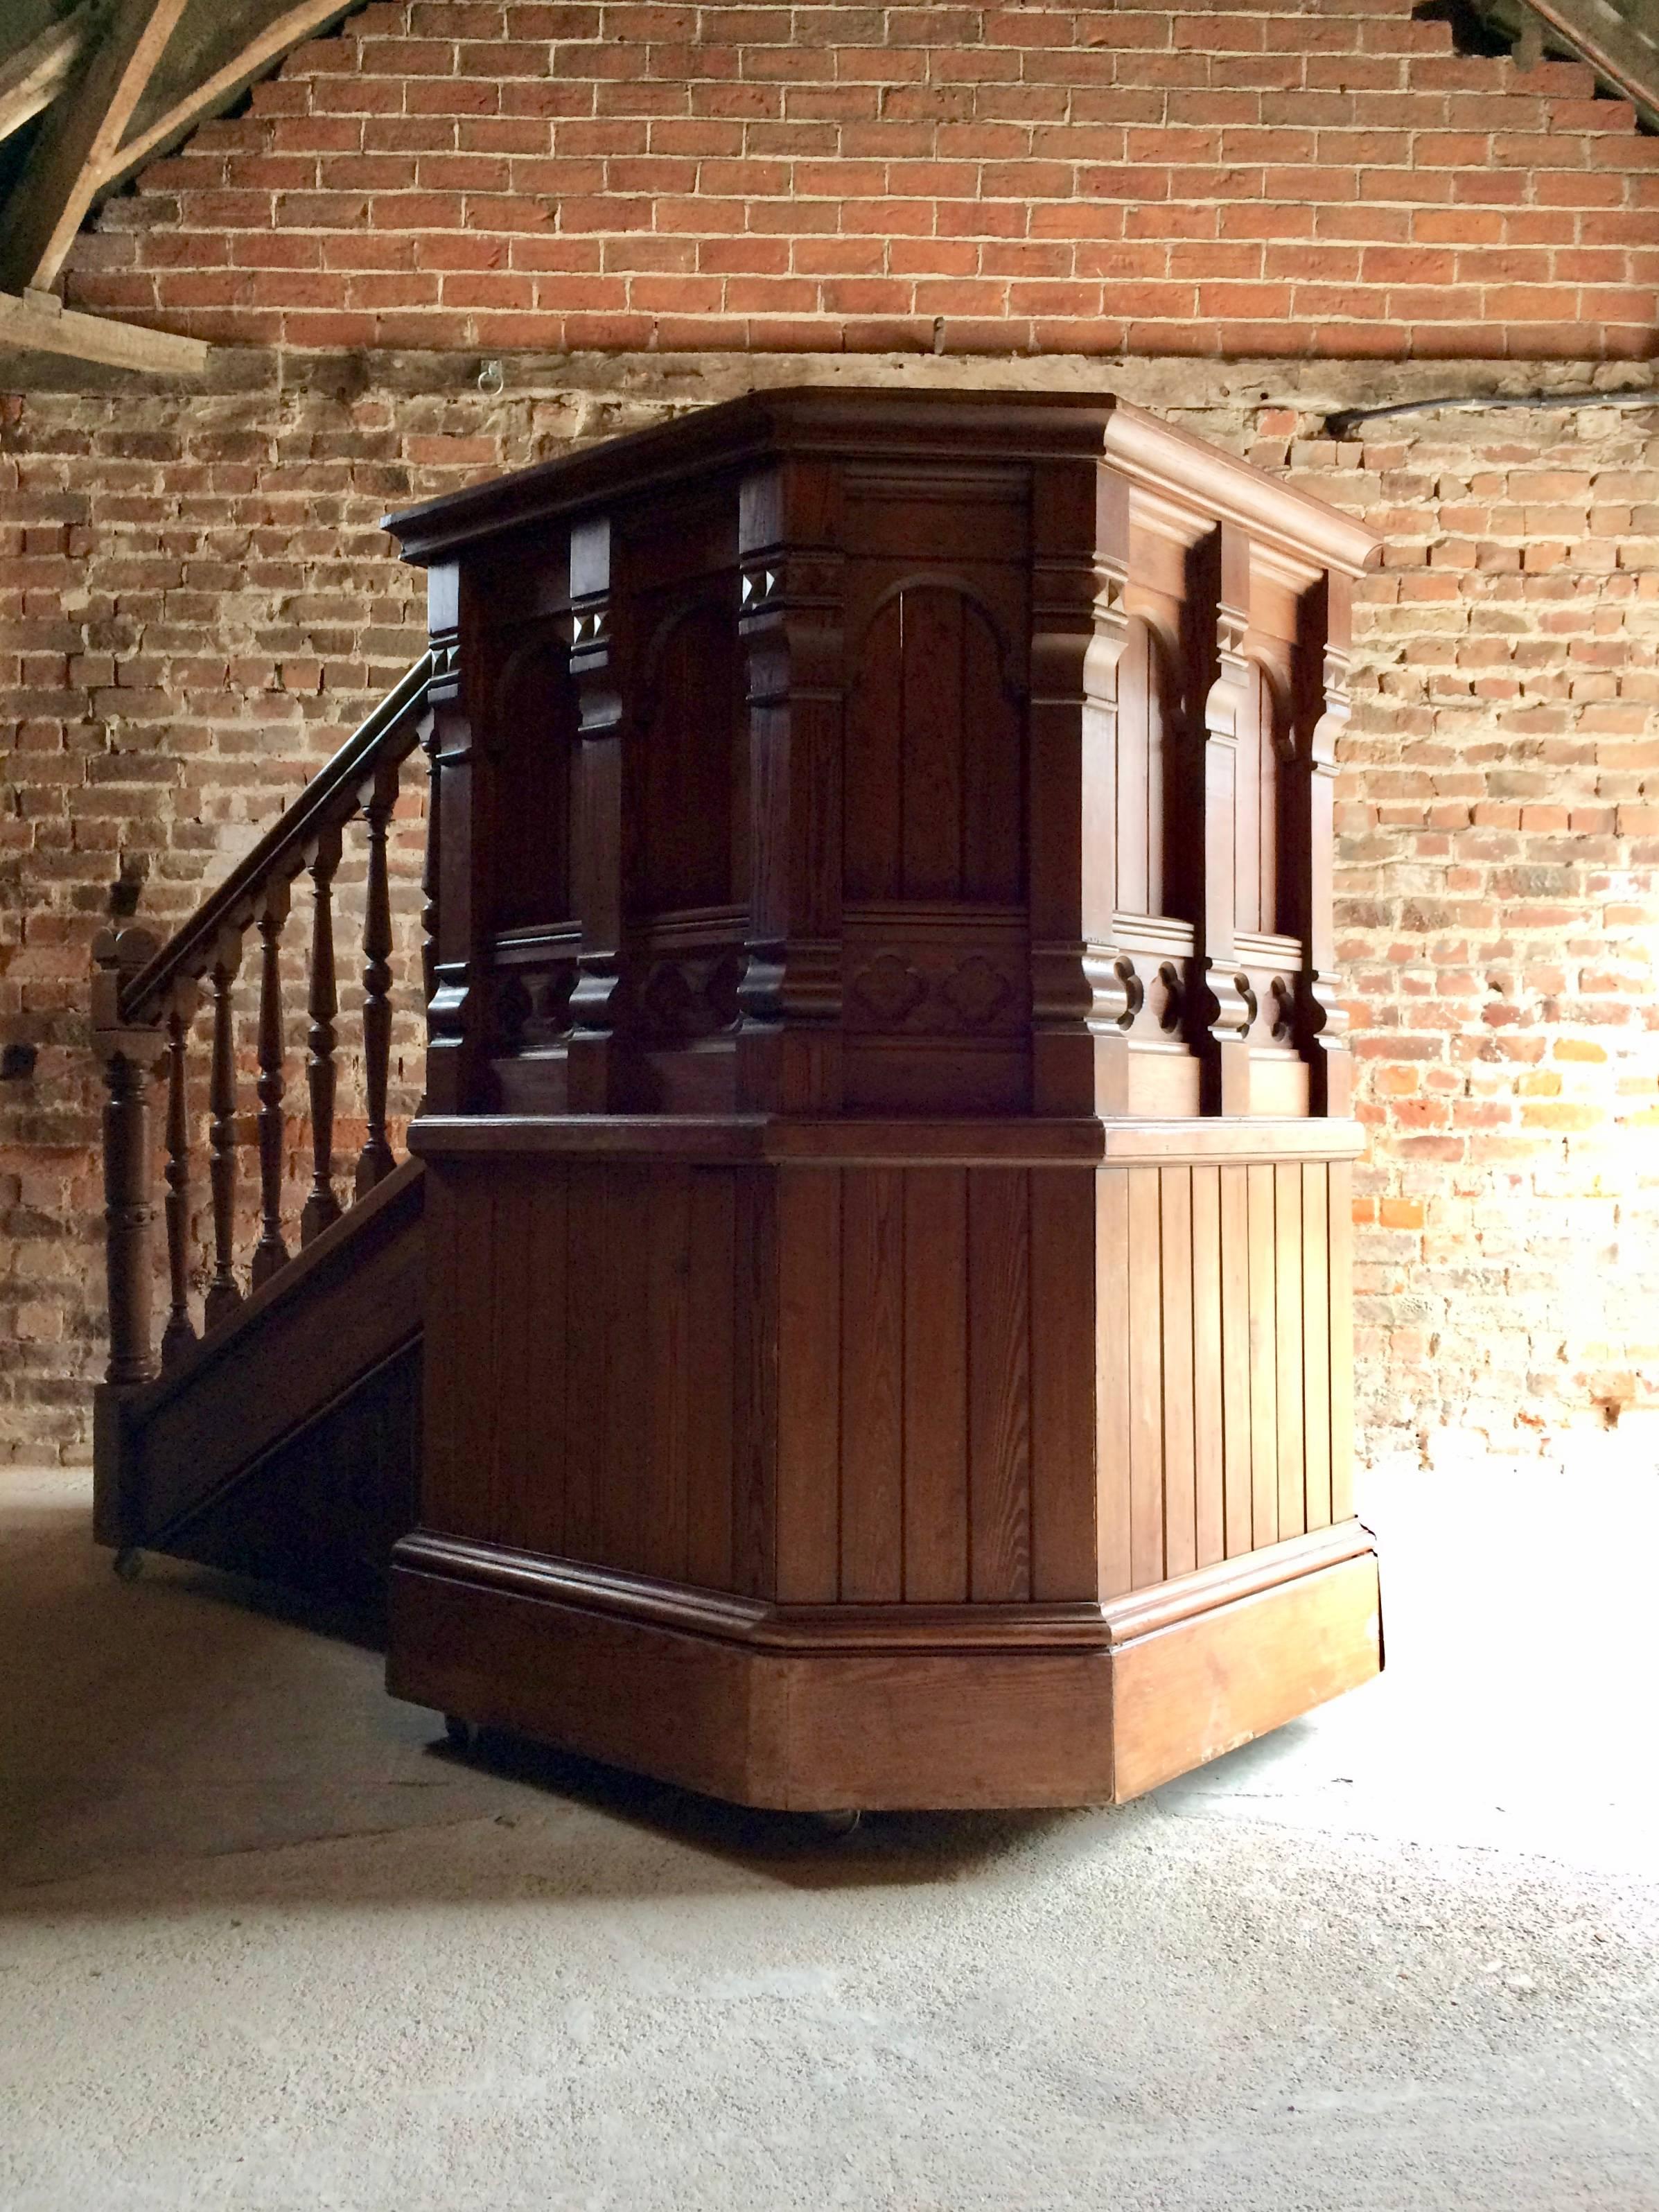 A stunning late Victorian early Edwardian pitch pine Gothic church pulpit with matching roll-away stairs, both the pulpit and stairs are on casters making moving easier, a seriously grand piece of furniture that is ideal for a club or bar and is